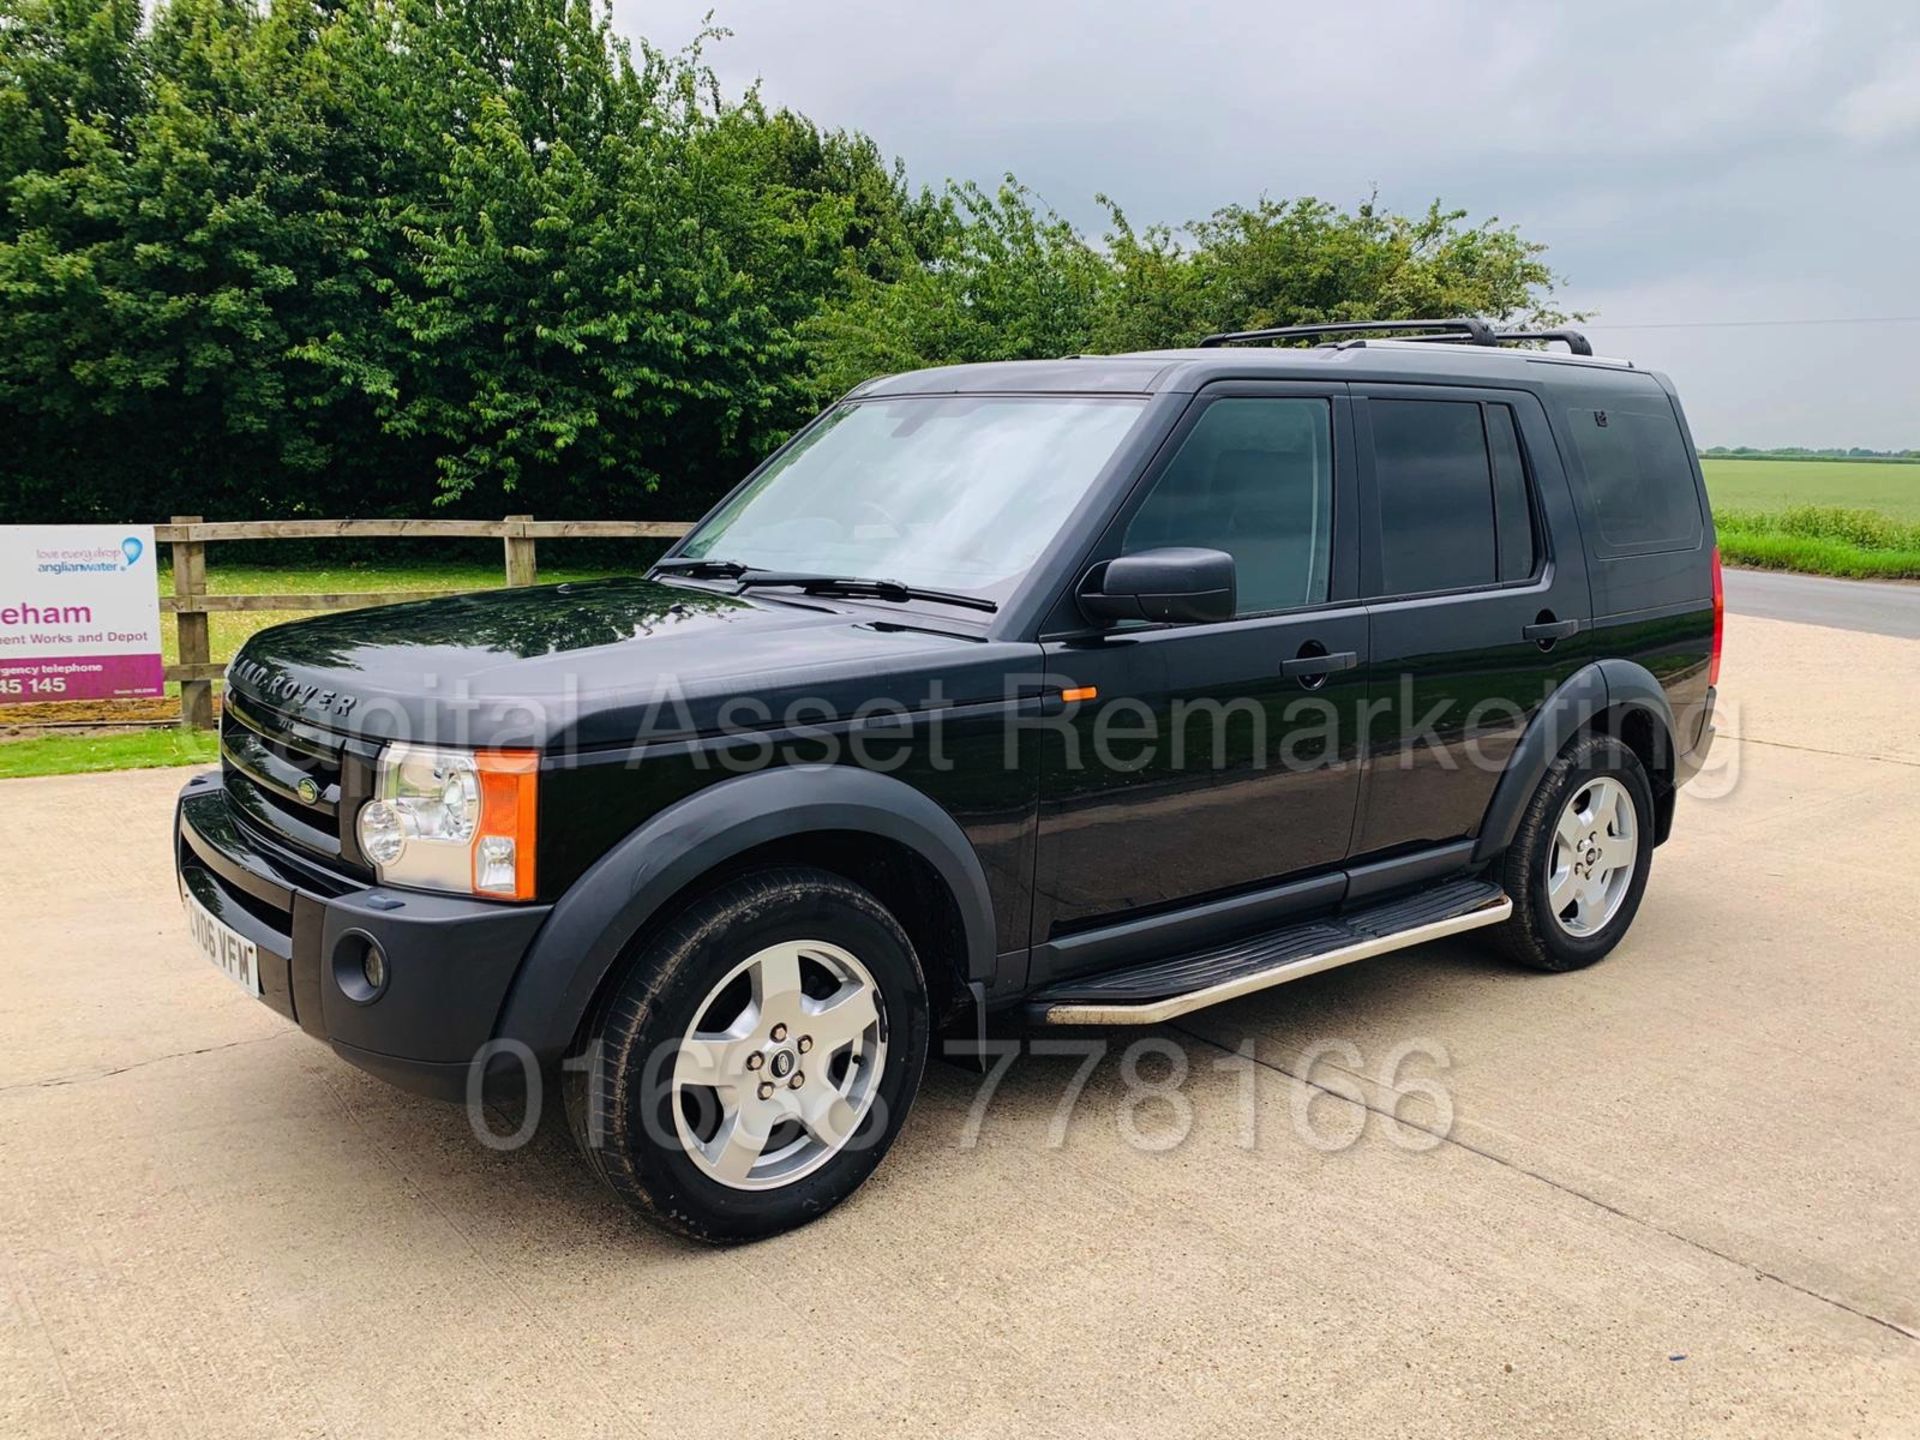 LAND ROVER DISCOVERY 3 *S EDITION* 7 SEATER SUV (2006 - NEW MODEL) '2.7 TDV6 - 190 BHP' *HUGE SPEC* - Image 4 of 36